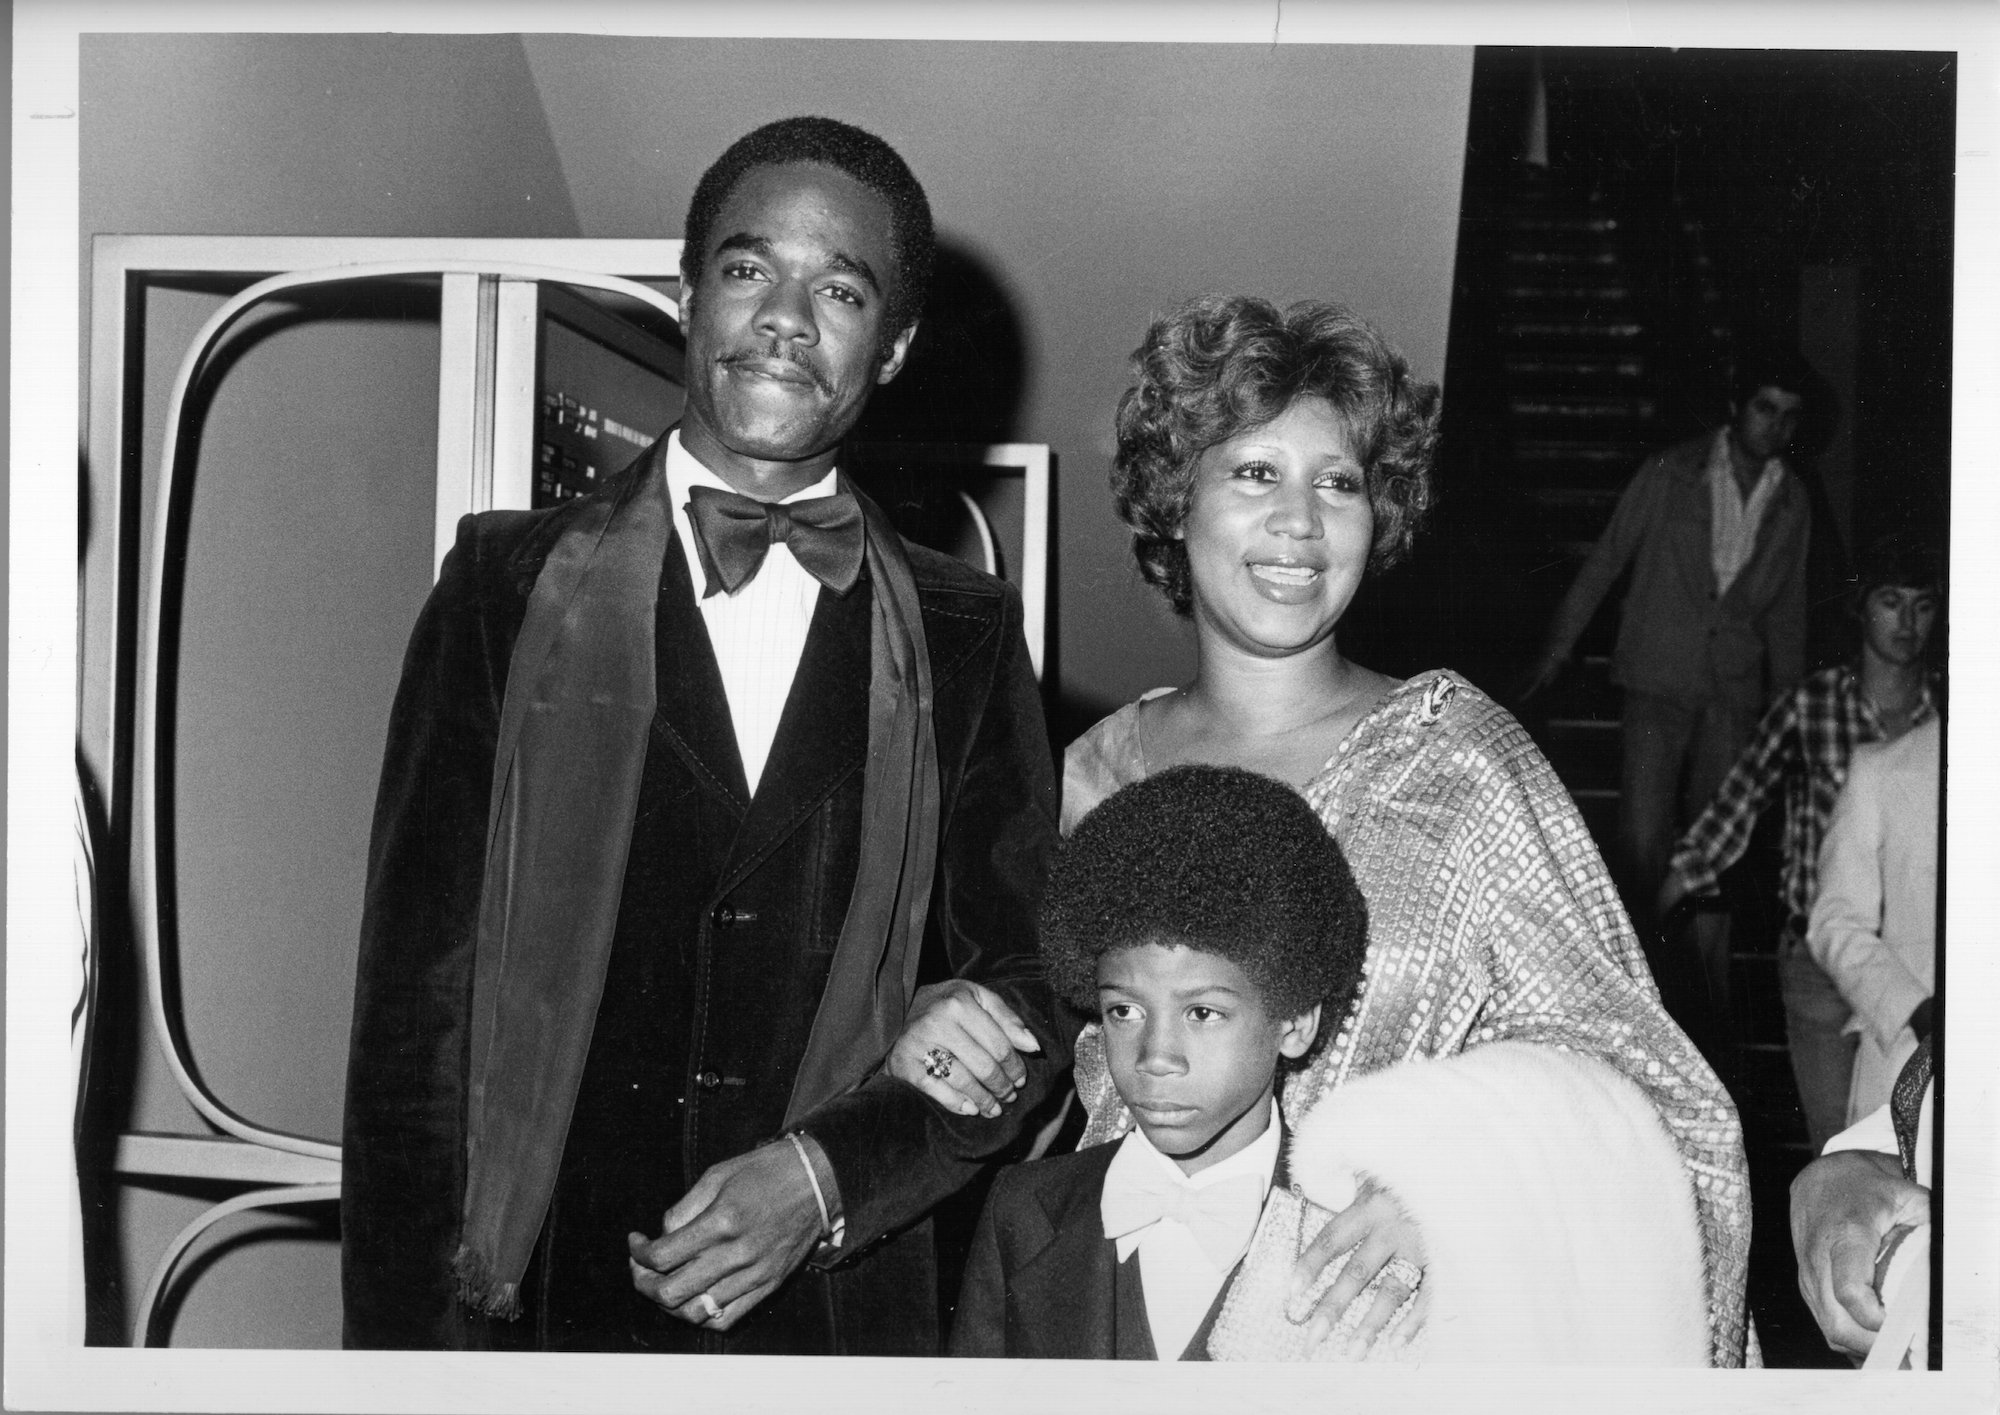 Aretha Franklin with her second husband, actor Glynn Turman in 1978